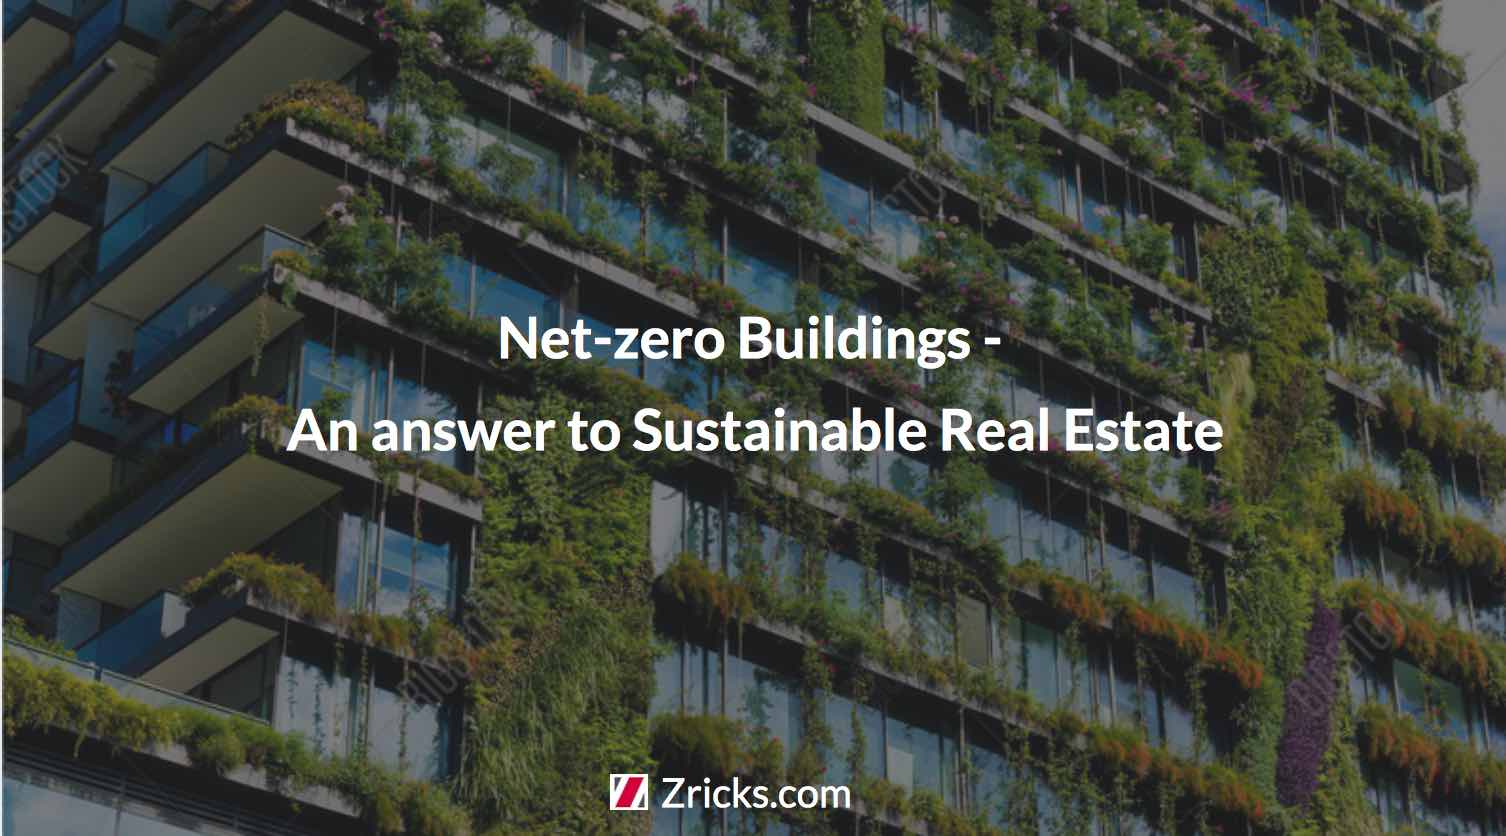 Net-zero Buildings - An answer to Sustainable Real Estate Update